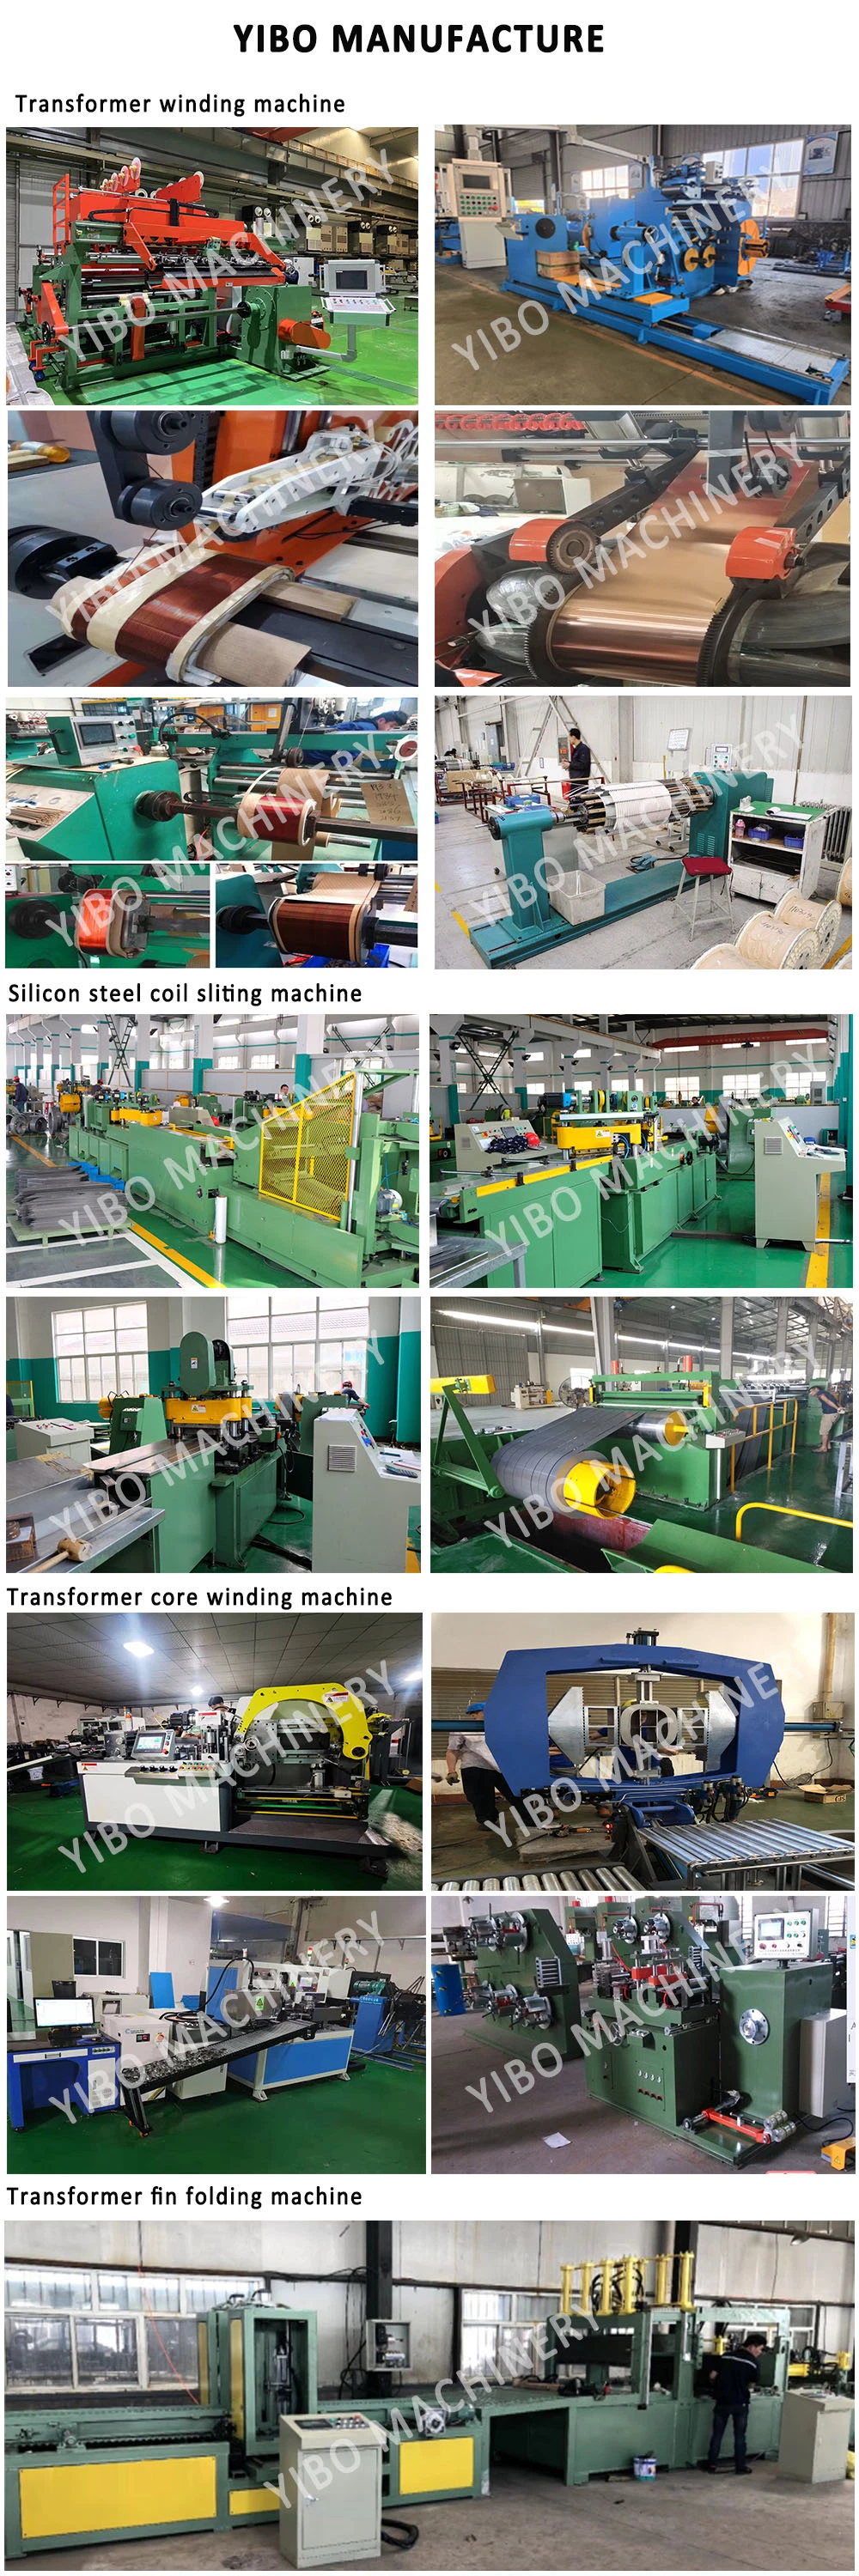 Making Amorphous Transformer Lap Core Silicon Steel Iron Core Assembly Platform Stacking Table